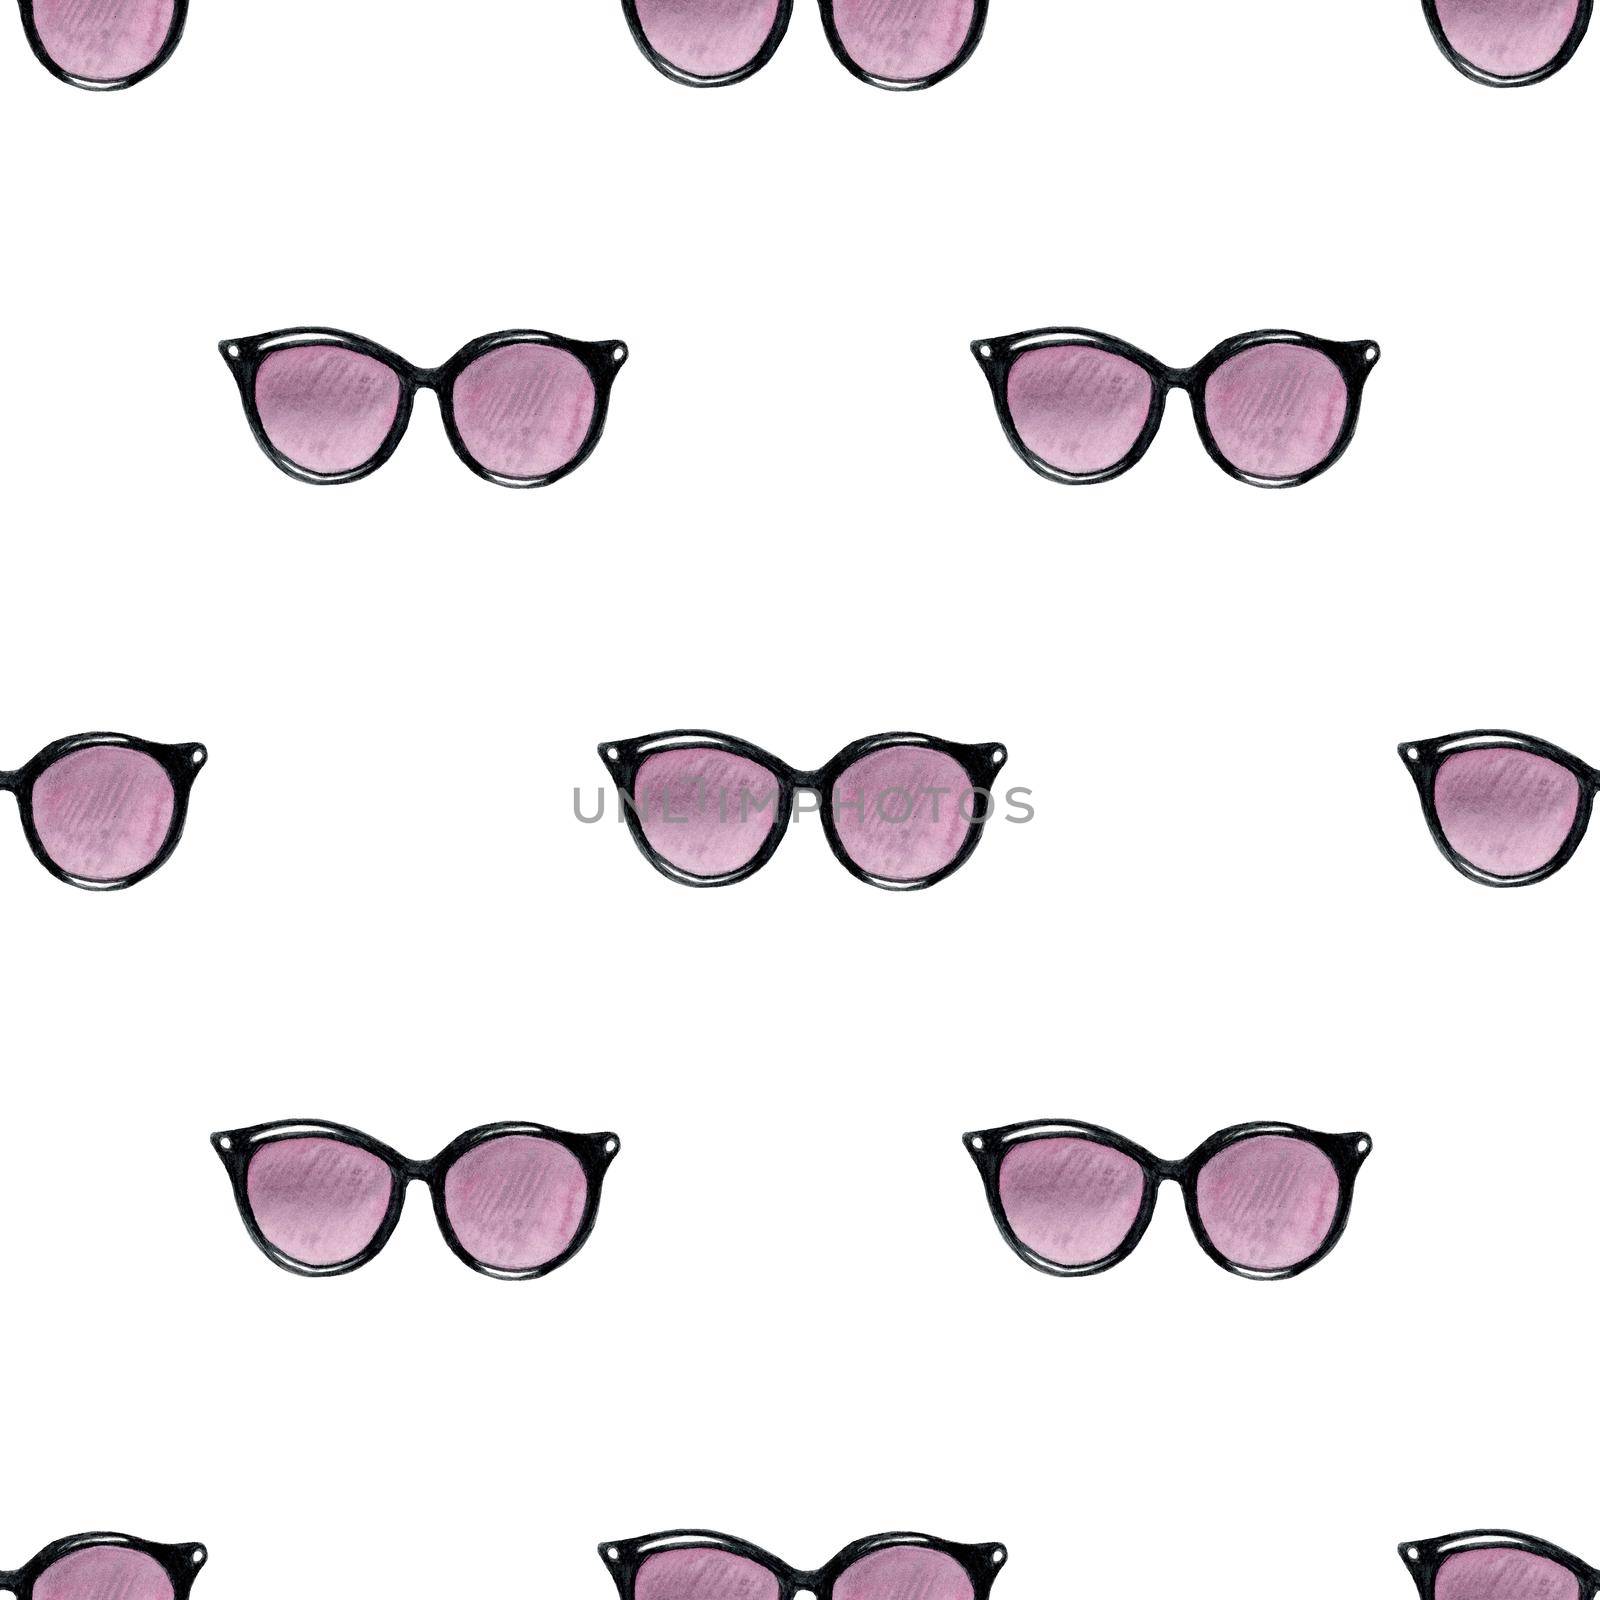 watercolor purple sunglasses fashion seamless pattern on white background for fabric, textile, scrapbooking, wrapping paper,invitations by dreamloud